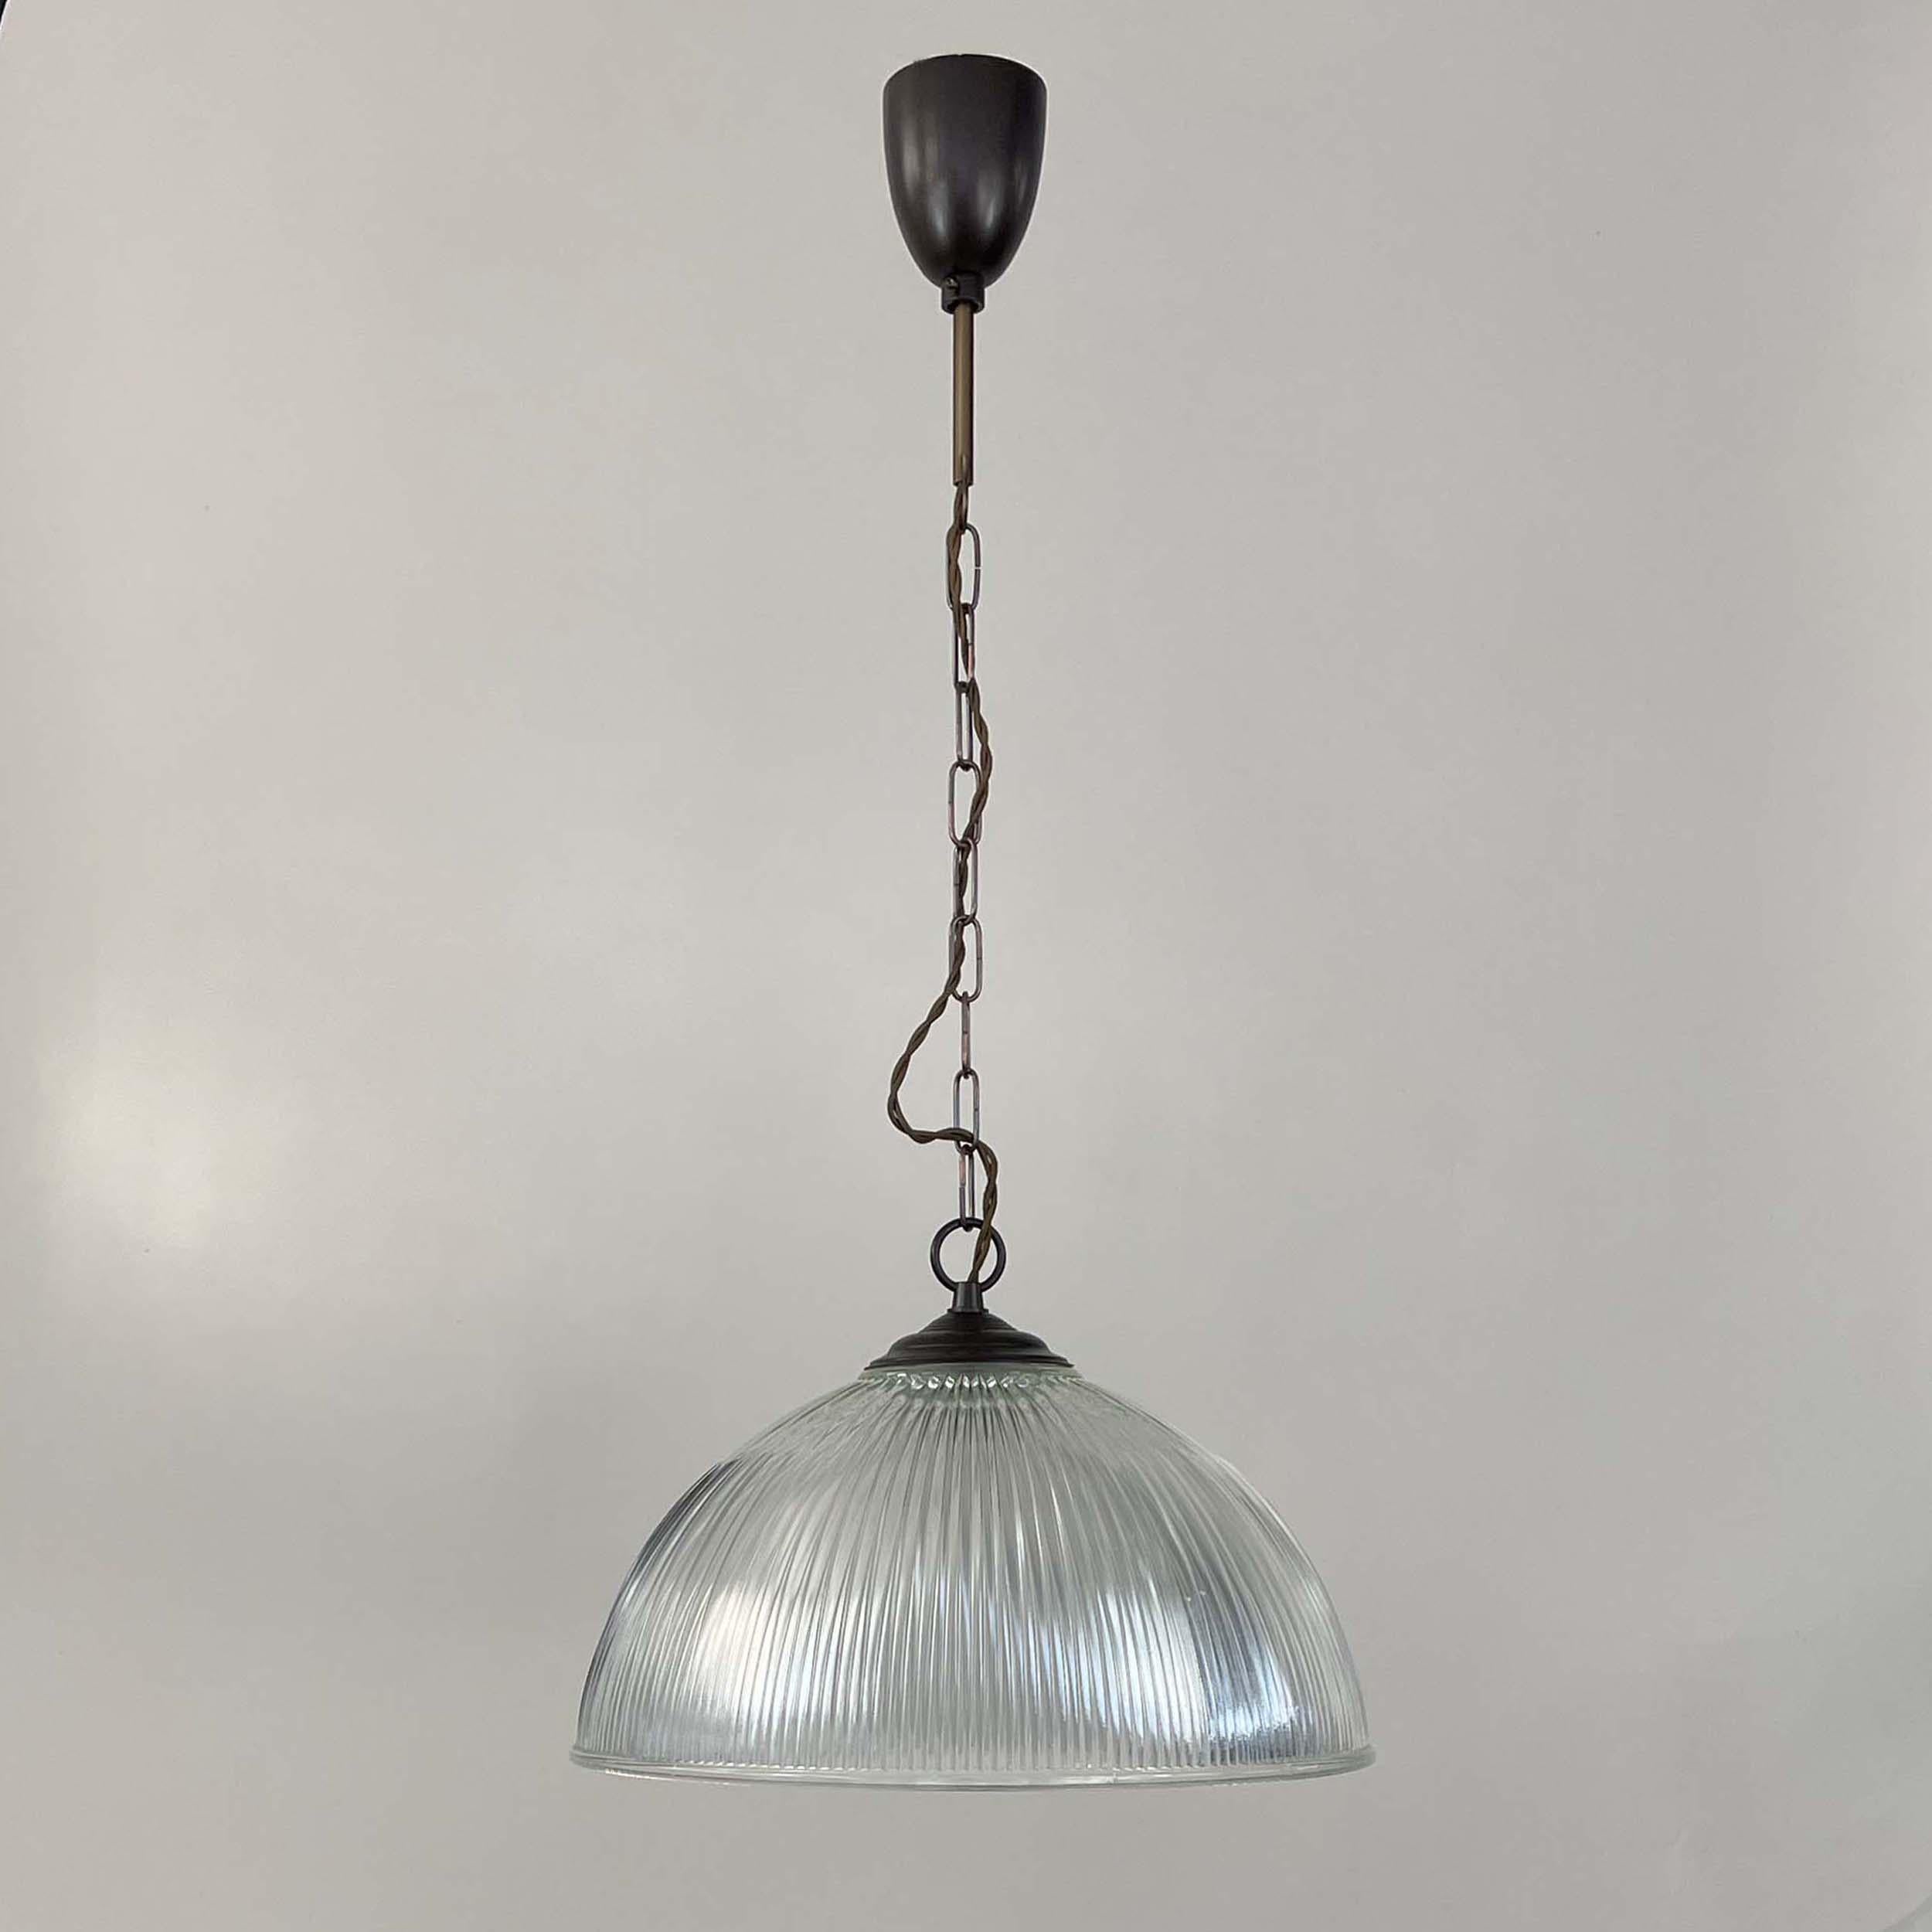 This industrial Art Deco dome shaped pendant light was manufactured in France in the 1930s. It features a clear prismatic glass Holophane lamp shade and patinated brass glass holder, chain and canopy. Rather heavy quality.

The glass gives off the